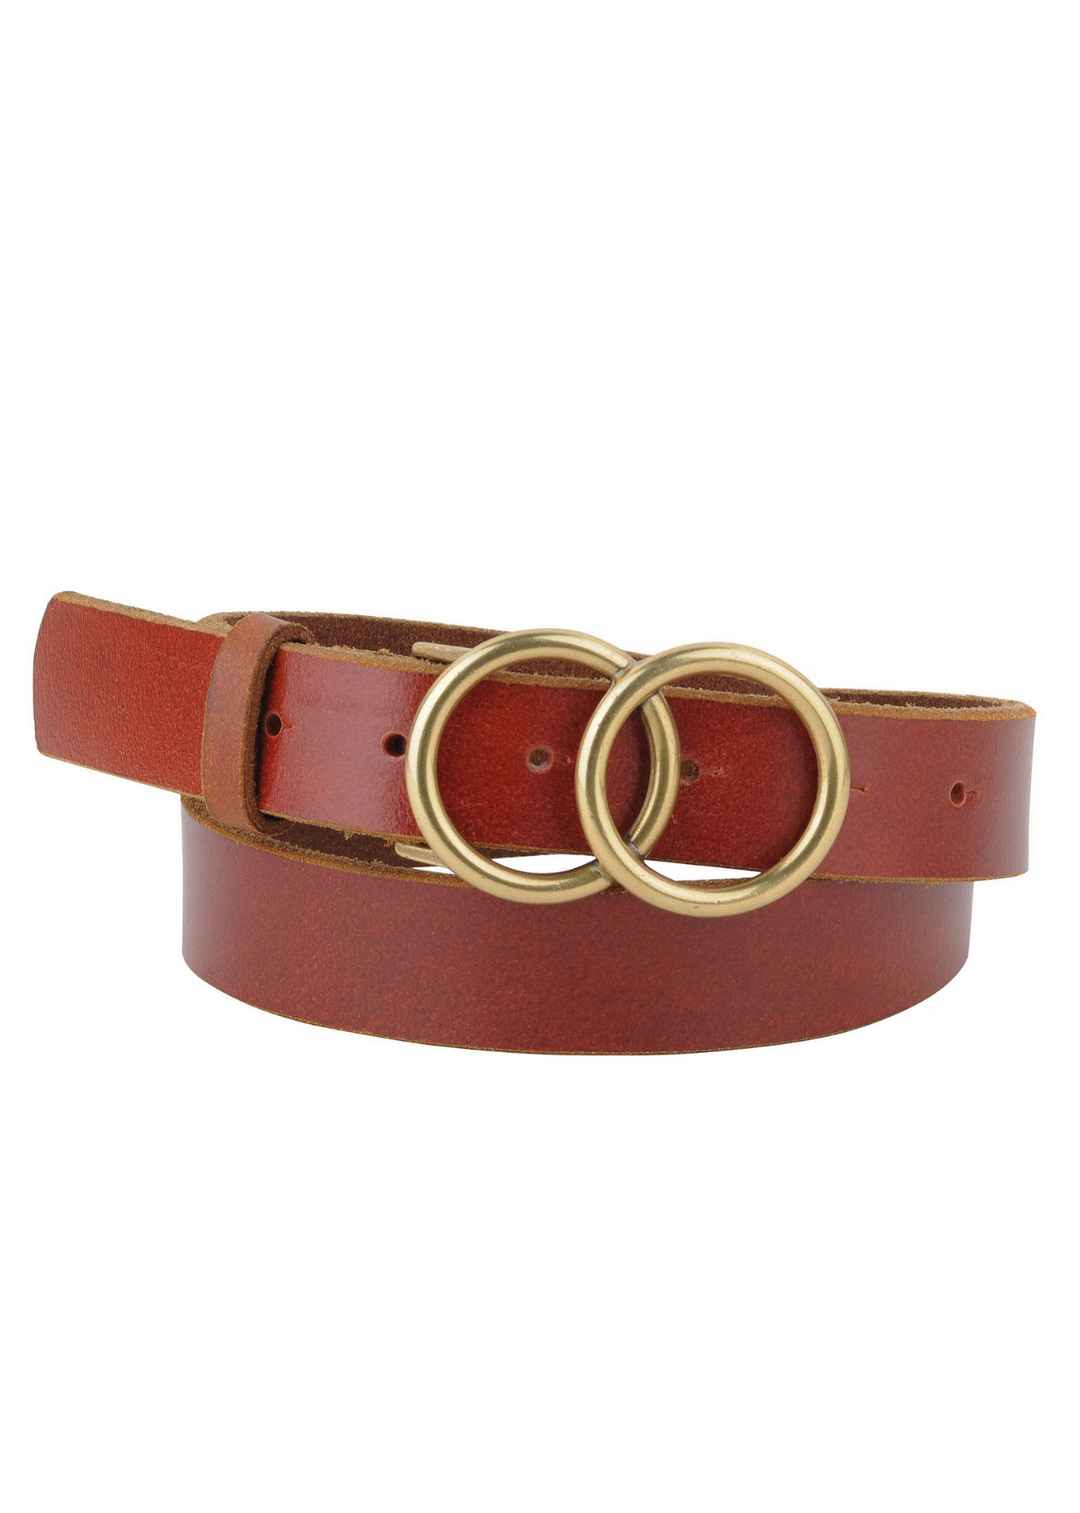 Most Wanted 1" Skinny Double Ring Belt (Tan)